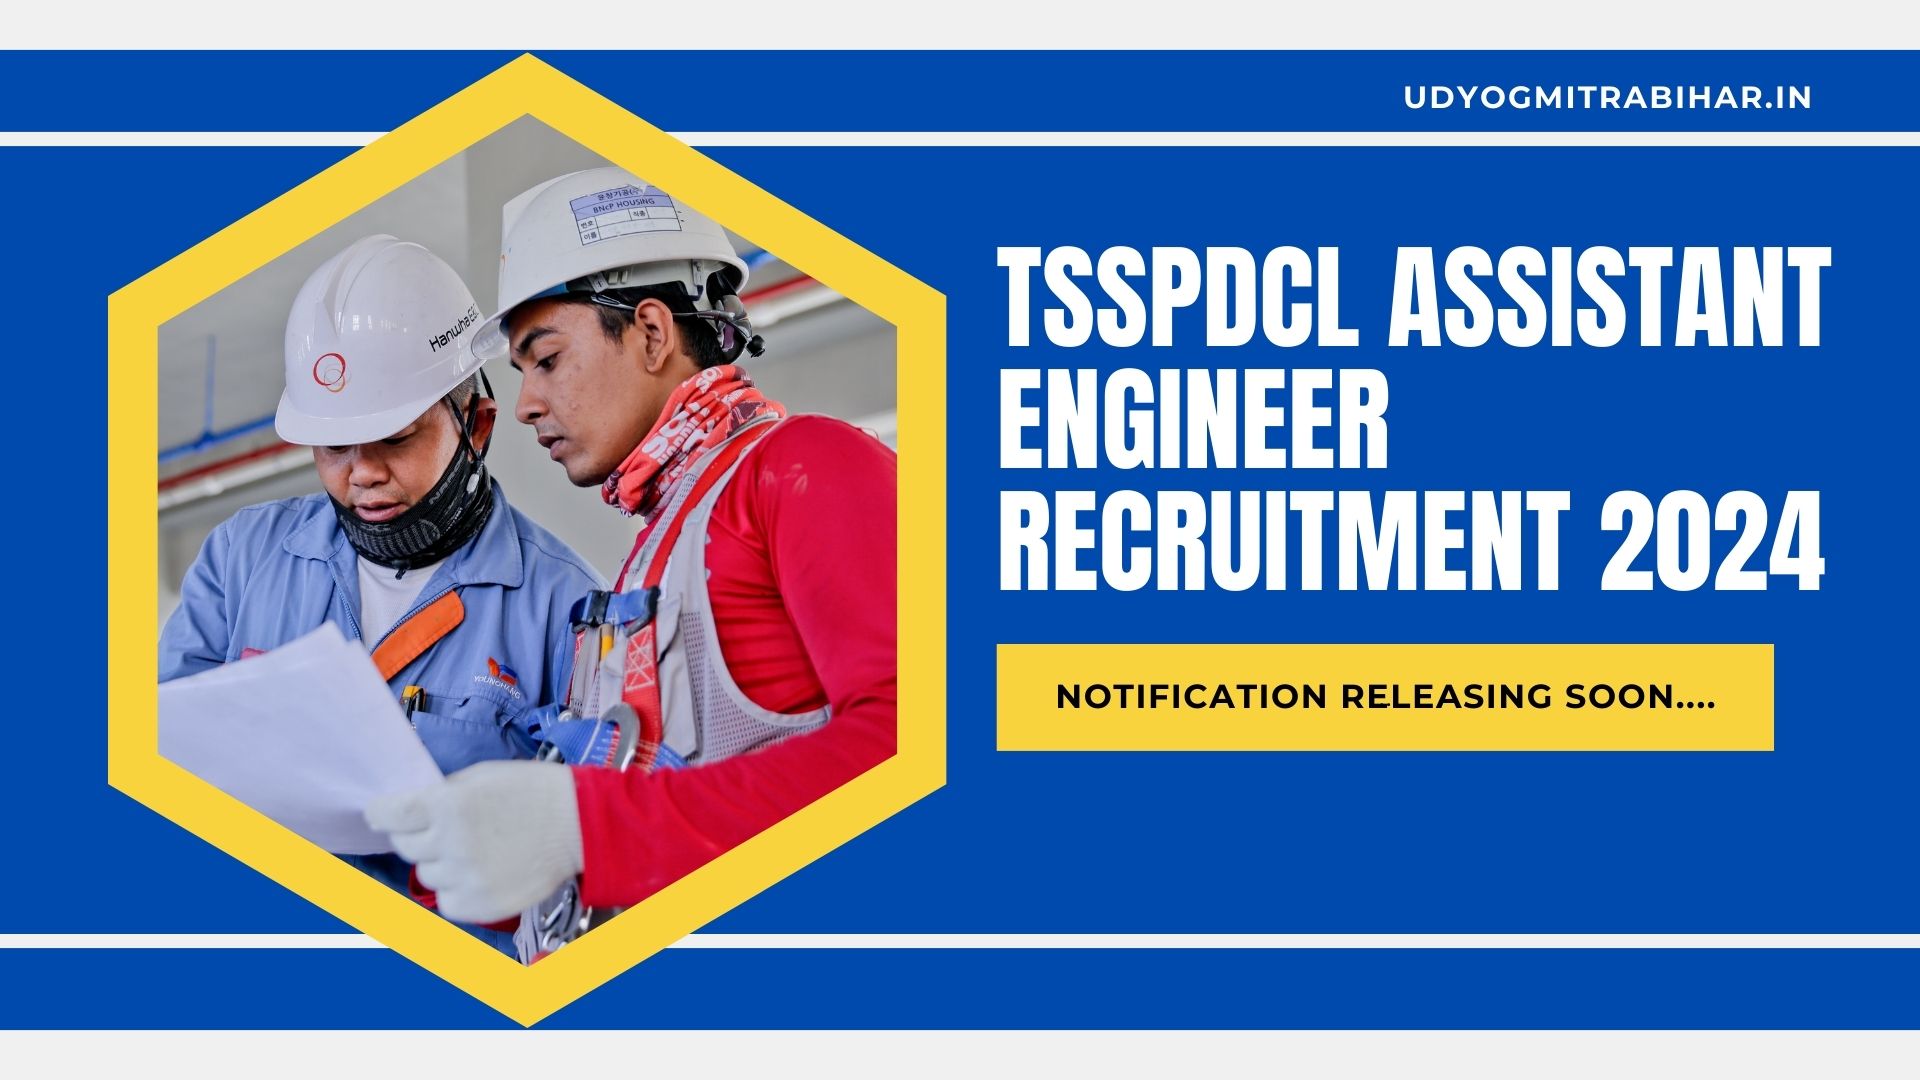 TSSPDCL Assistant Engineer Recruitment 2024 for 48 Vacant Posts, Application Process, Eligibility Criteria, Salary, Syllabus, Selection Process